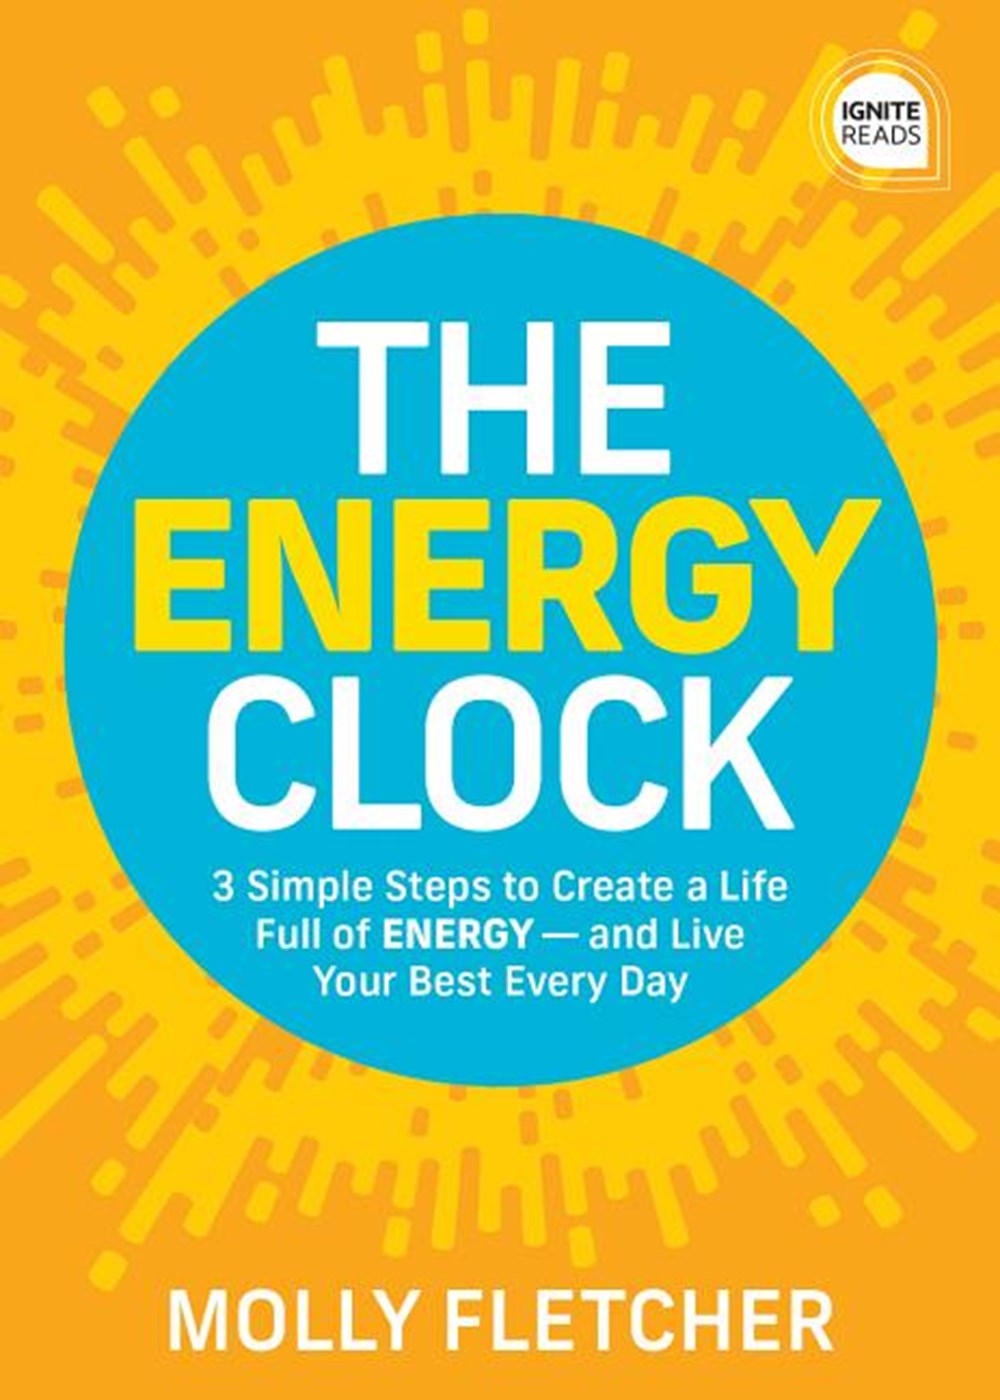 Energy Clock How to Use Your Energy and Resources on What's Important - And Eliminate the Stress of 